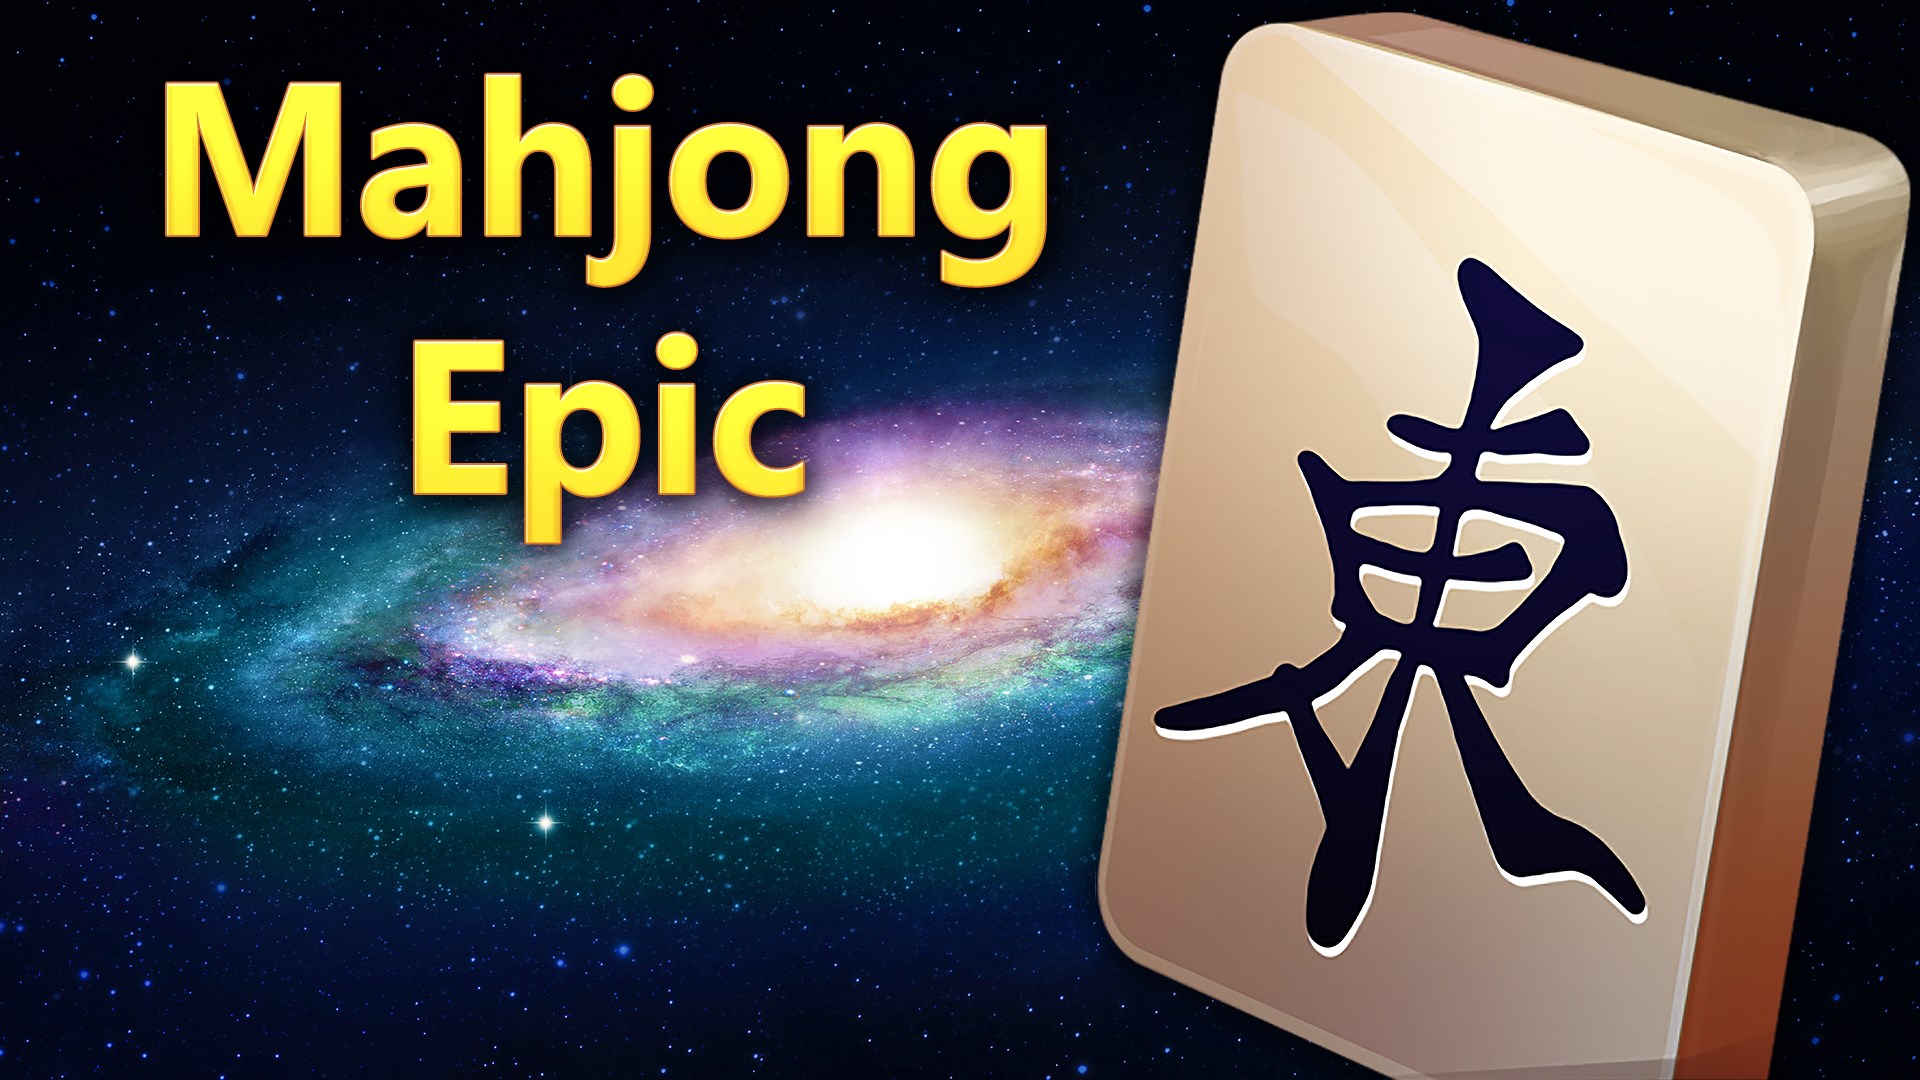 download the new version Mahjong Epic